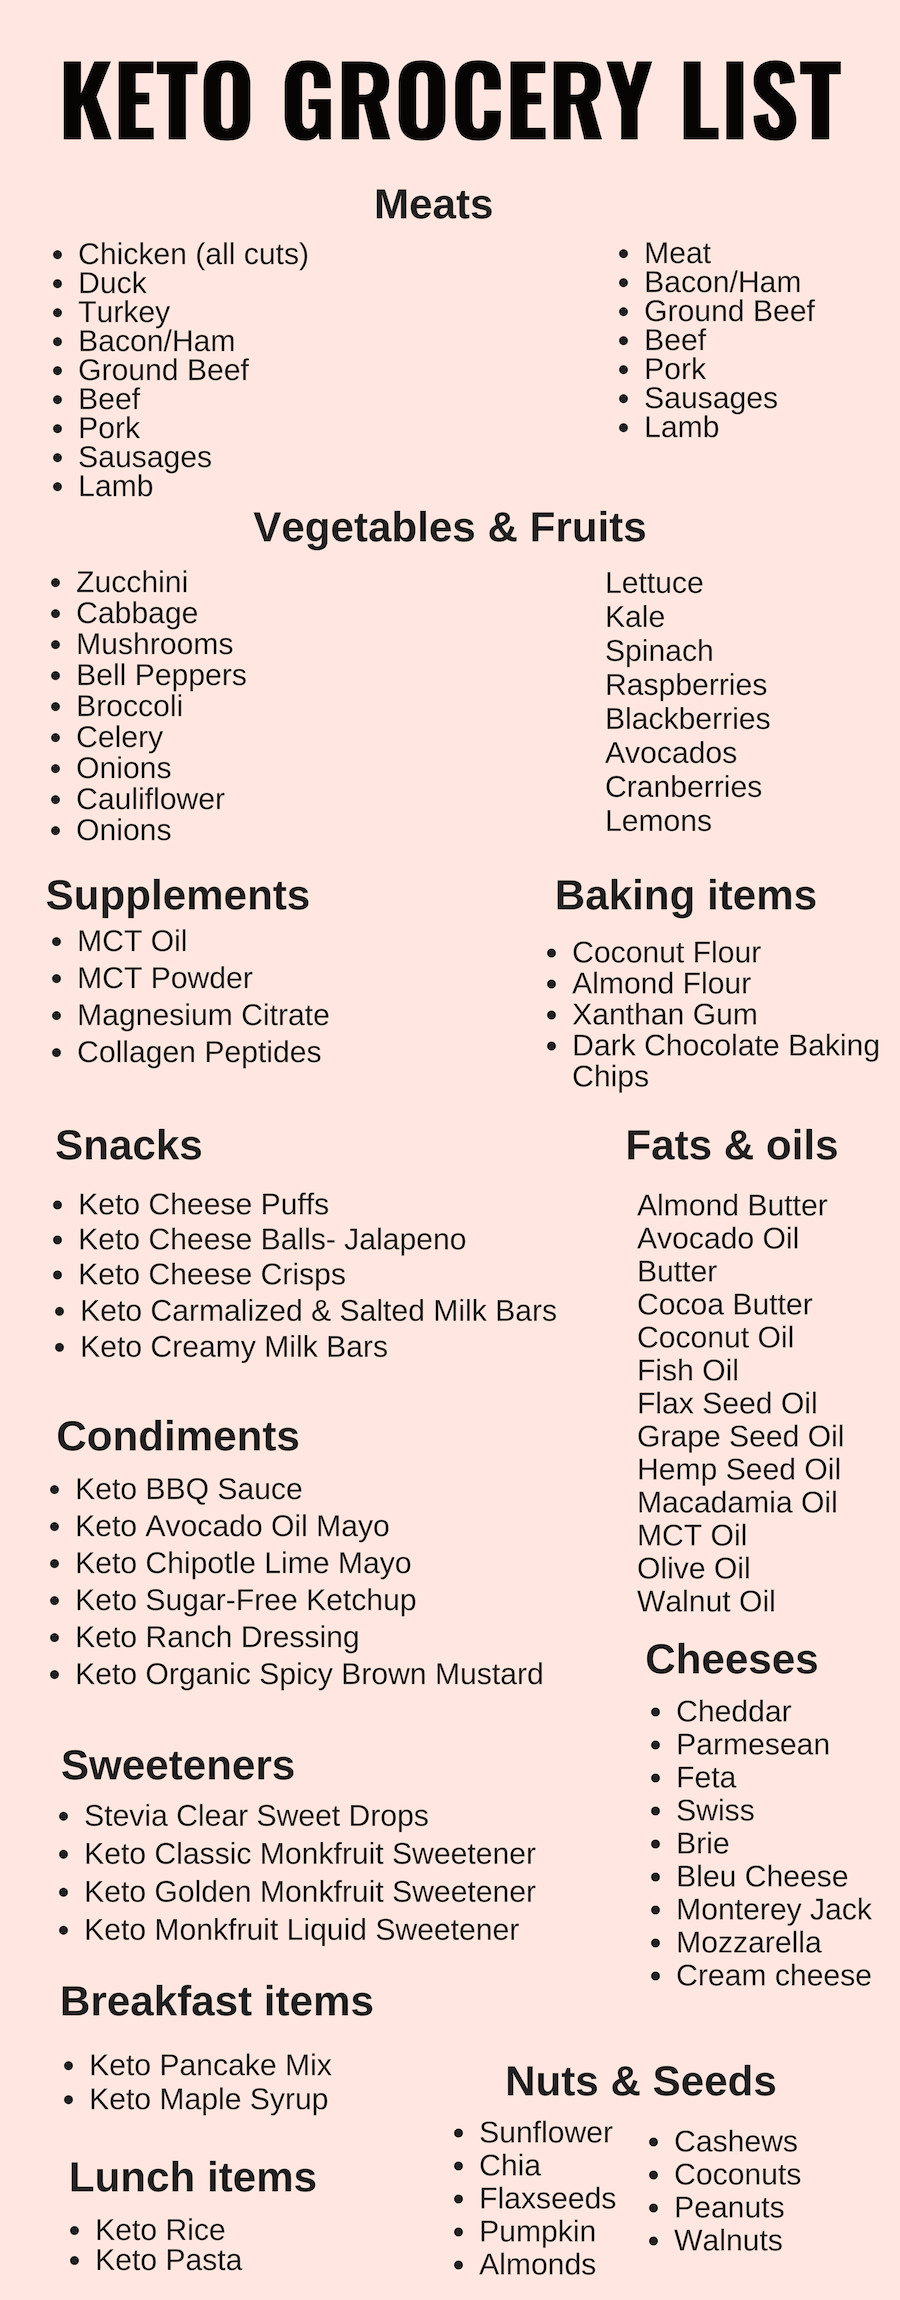 Keto Diet For Beginners Meal Plan With Grocery List
 Keto Grocery List For Beginners – Simple Grocery List